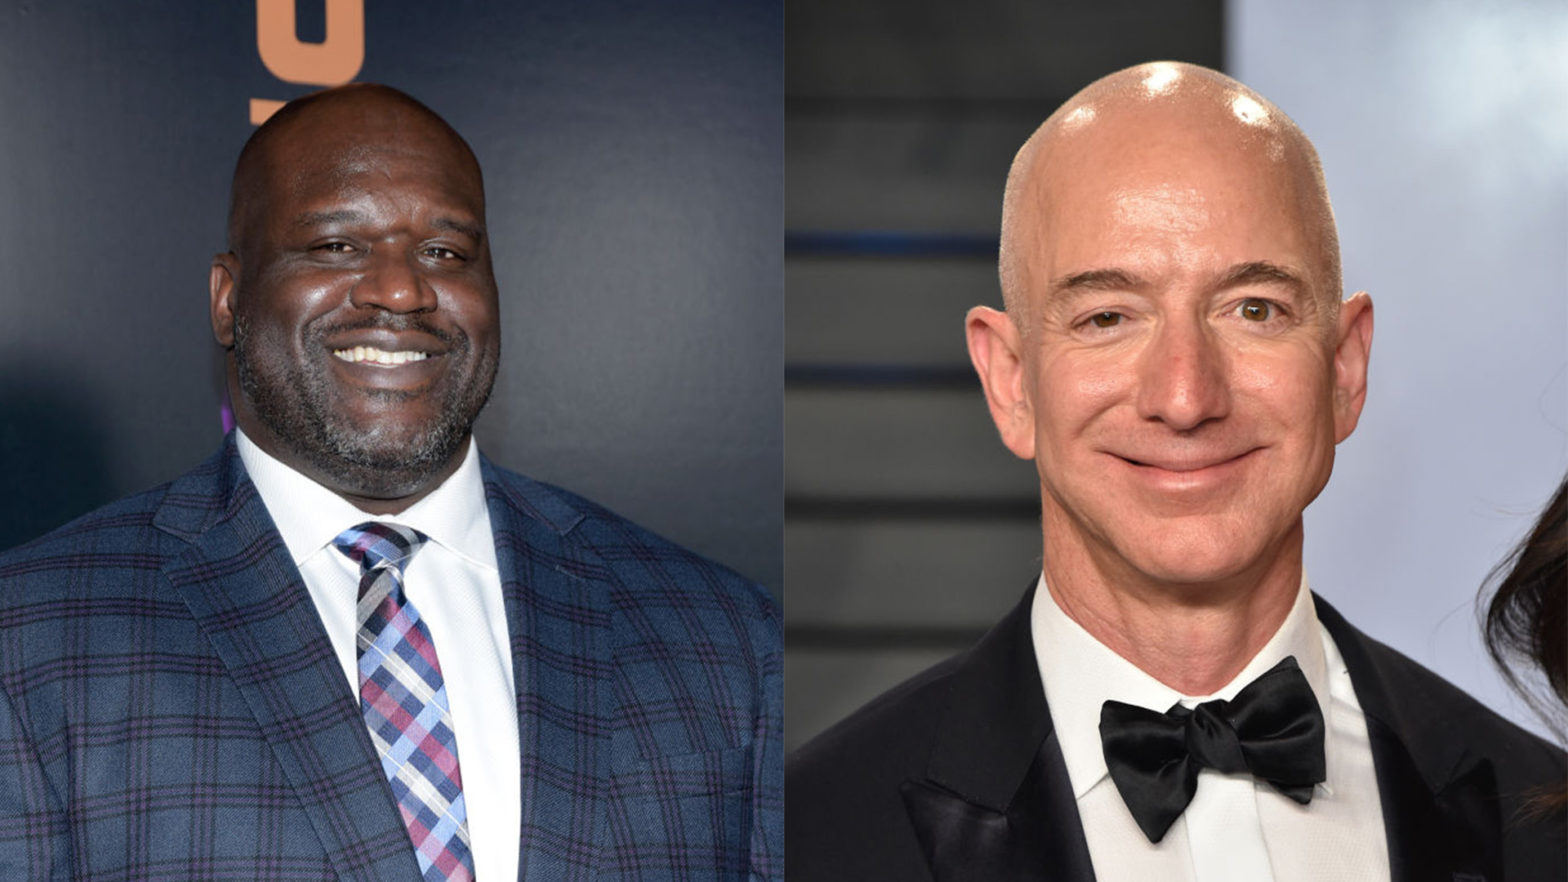 Shaquille O'Neal Shares How Jeff Bezos' Take On Investments Helped Him Make His Own Moves